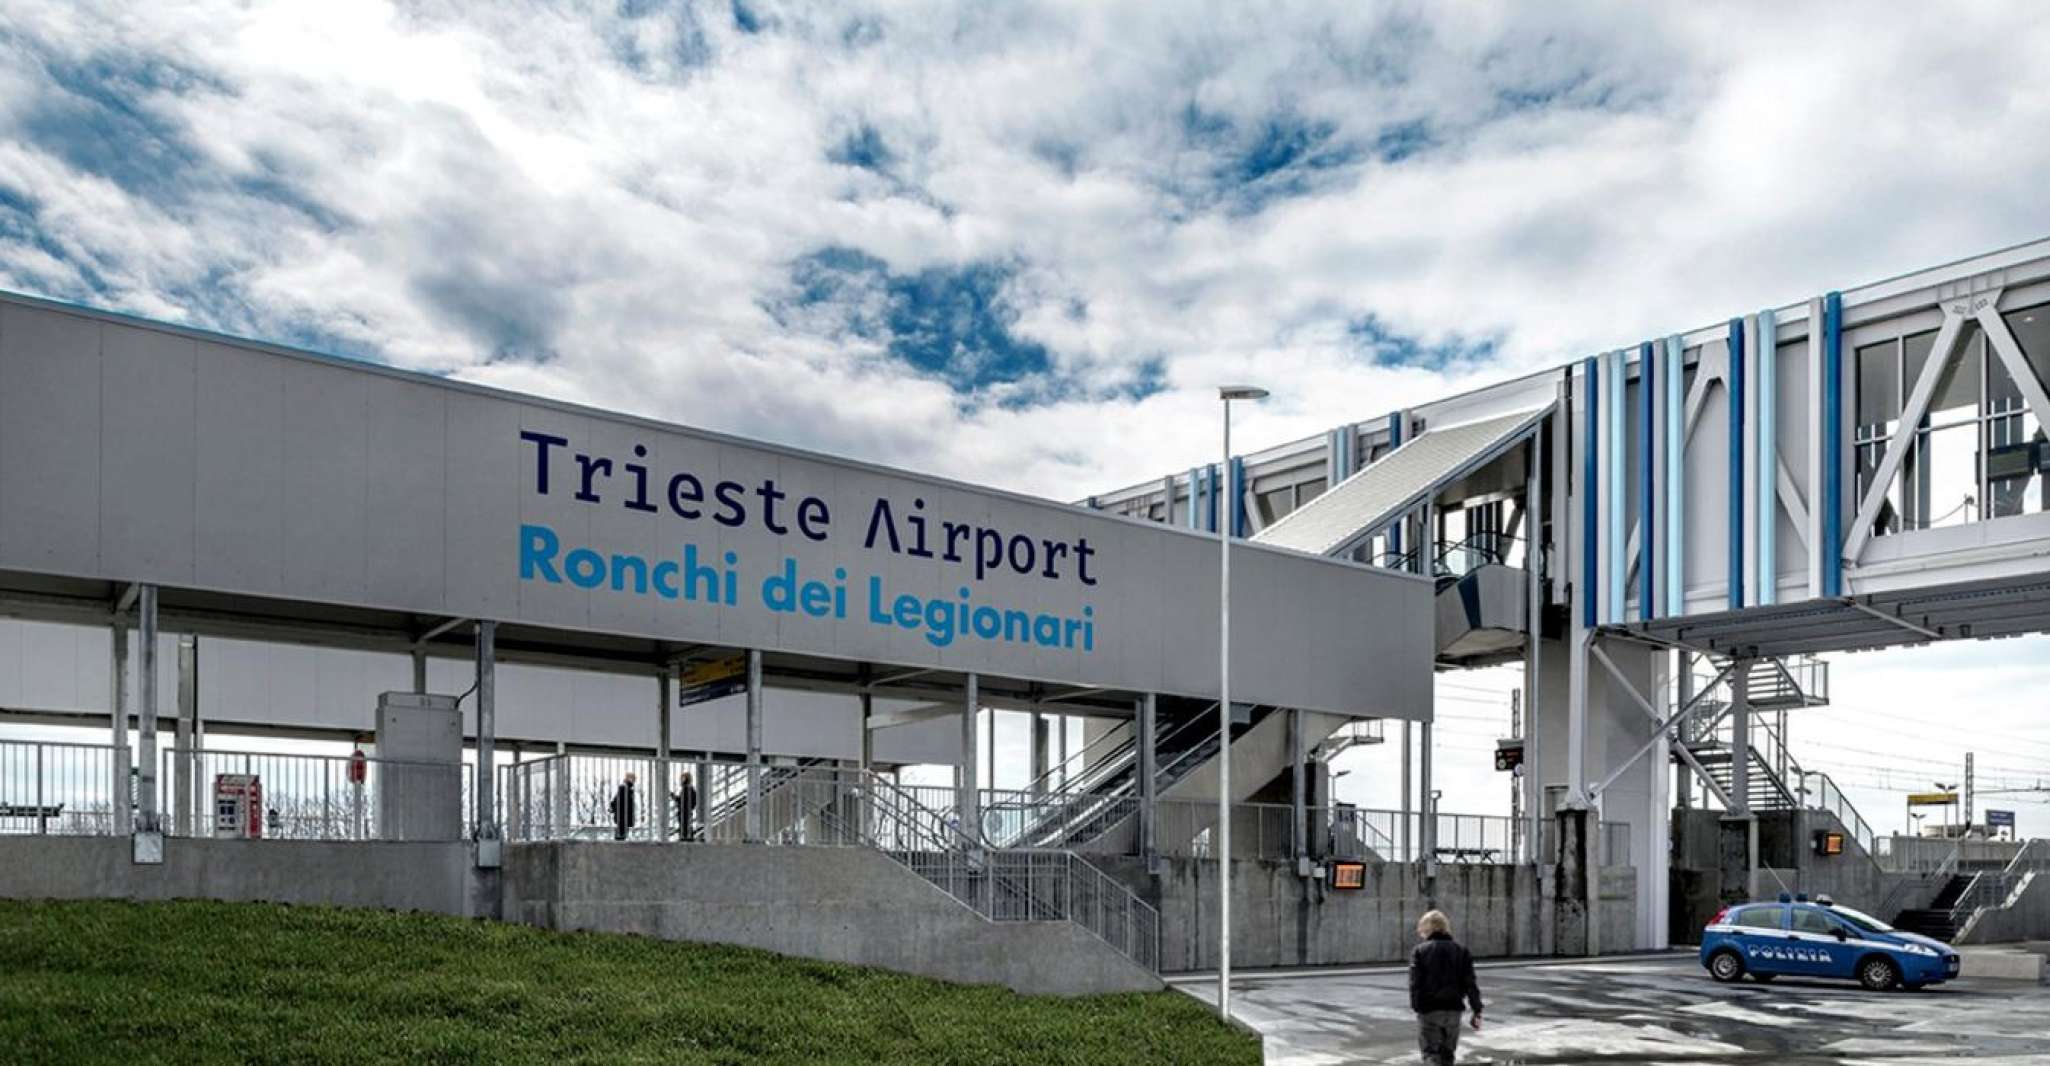 Trieste, Train ticket connecting airport and city - Housity